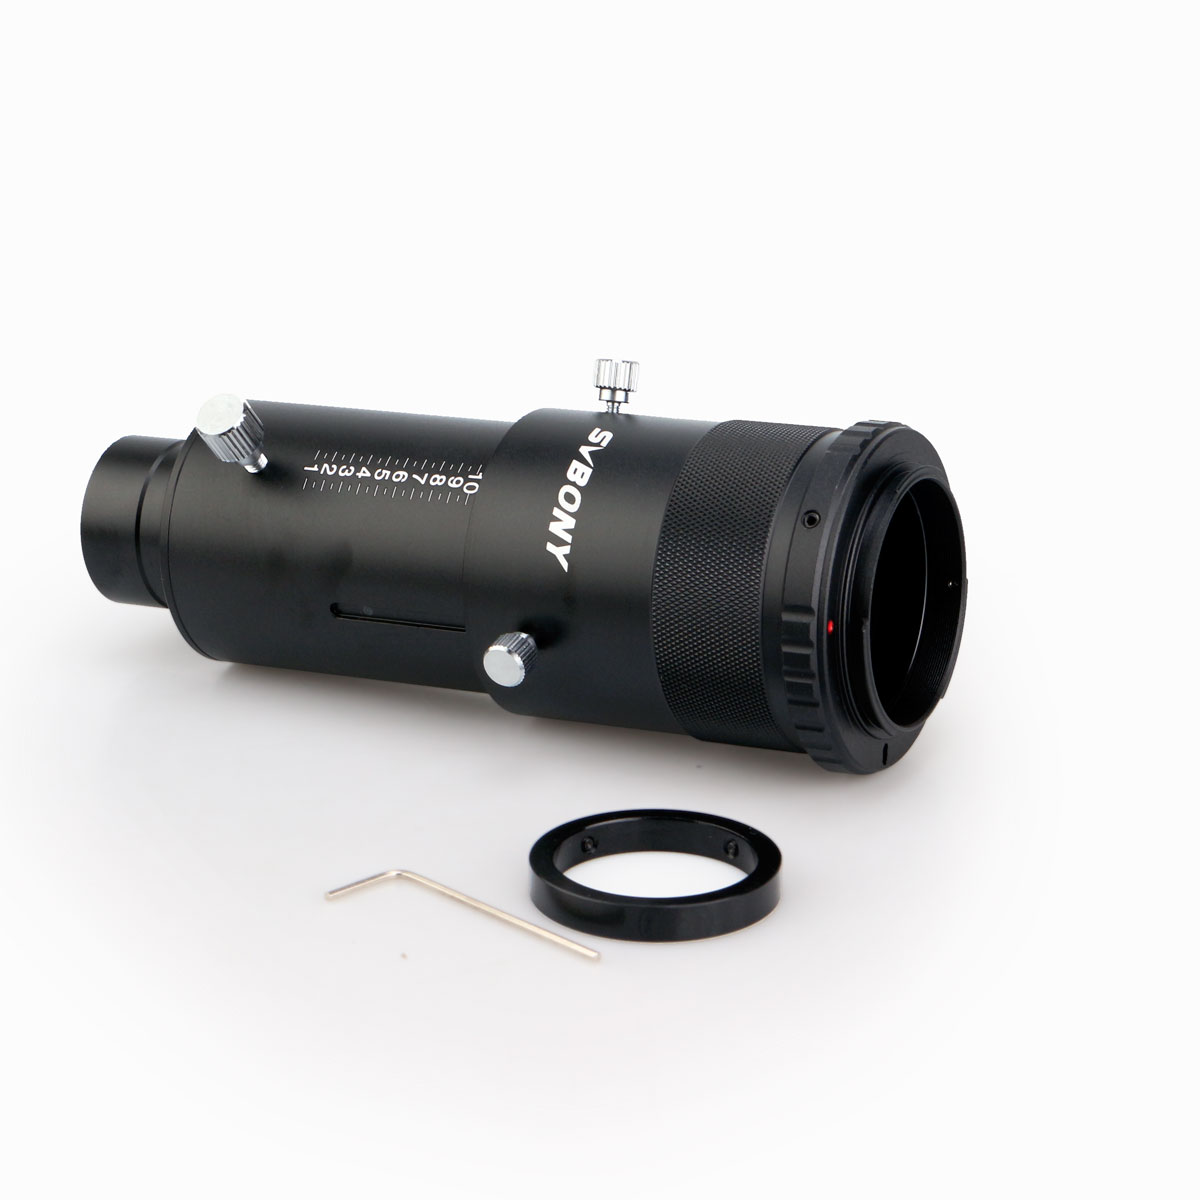 SVBONY-SV112-125quot-Fully-Metal-Deluxe-Variable-Eyepiece-Projection-Kit-for-Telescopes-with-T-Ring--1842642-3